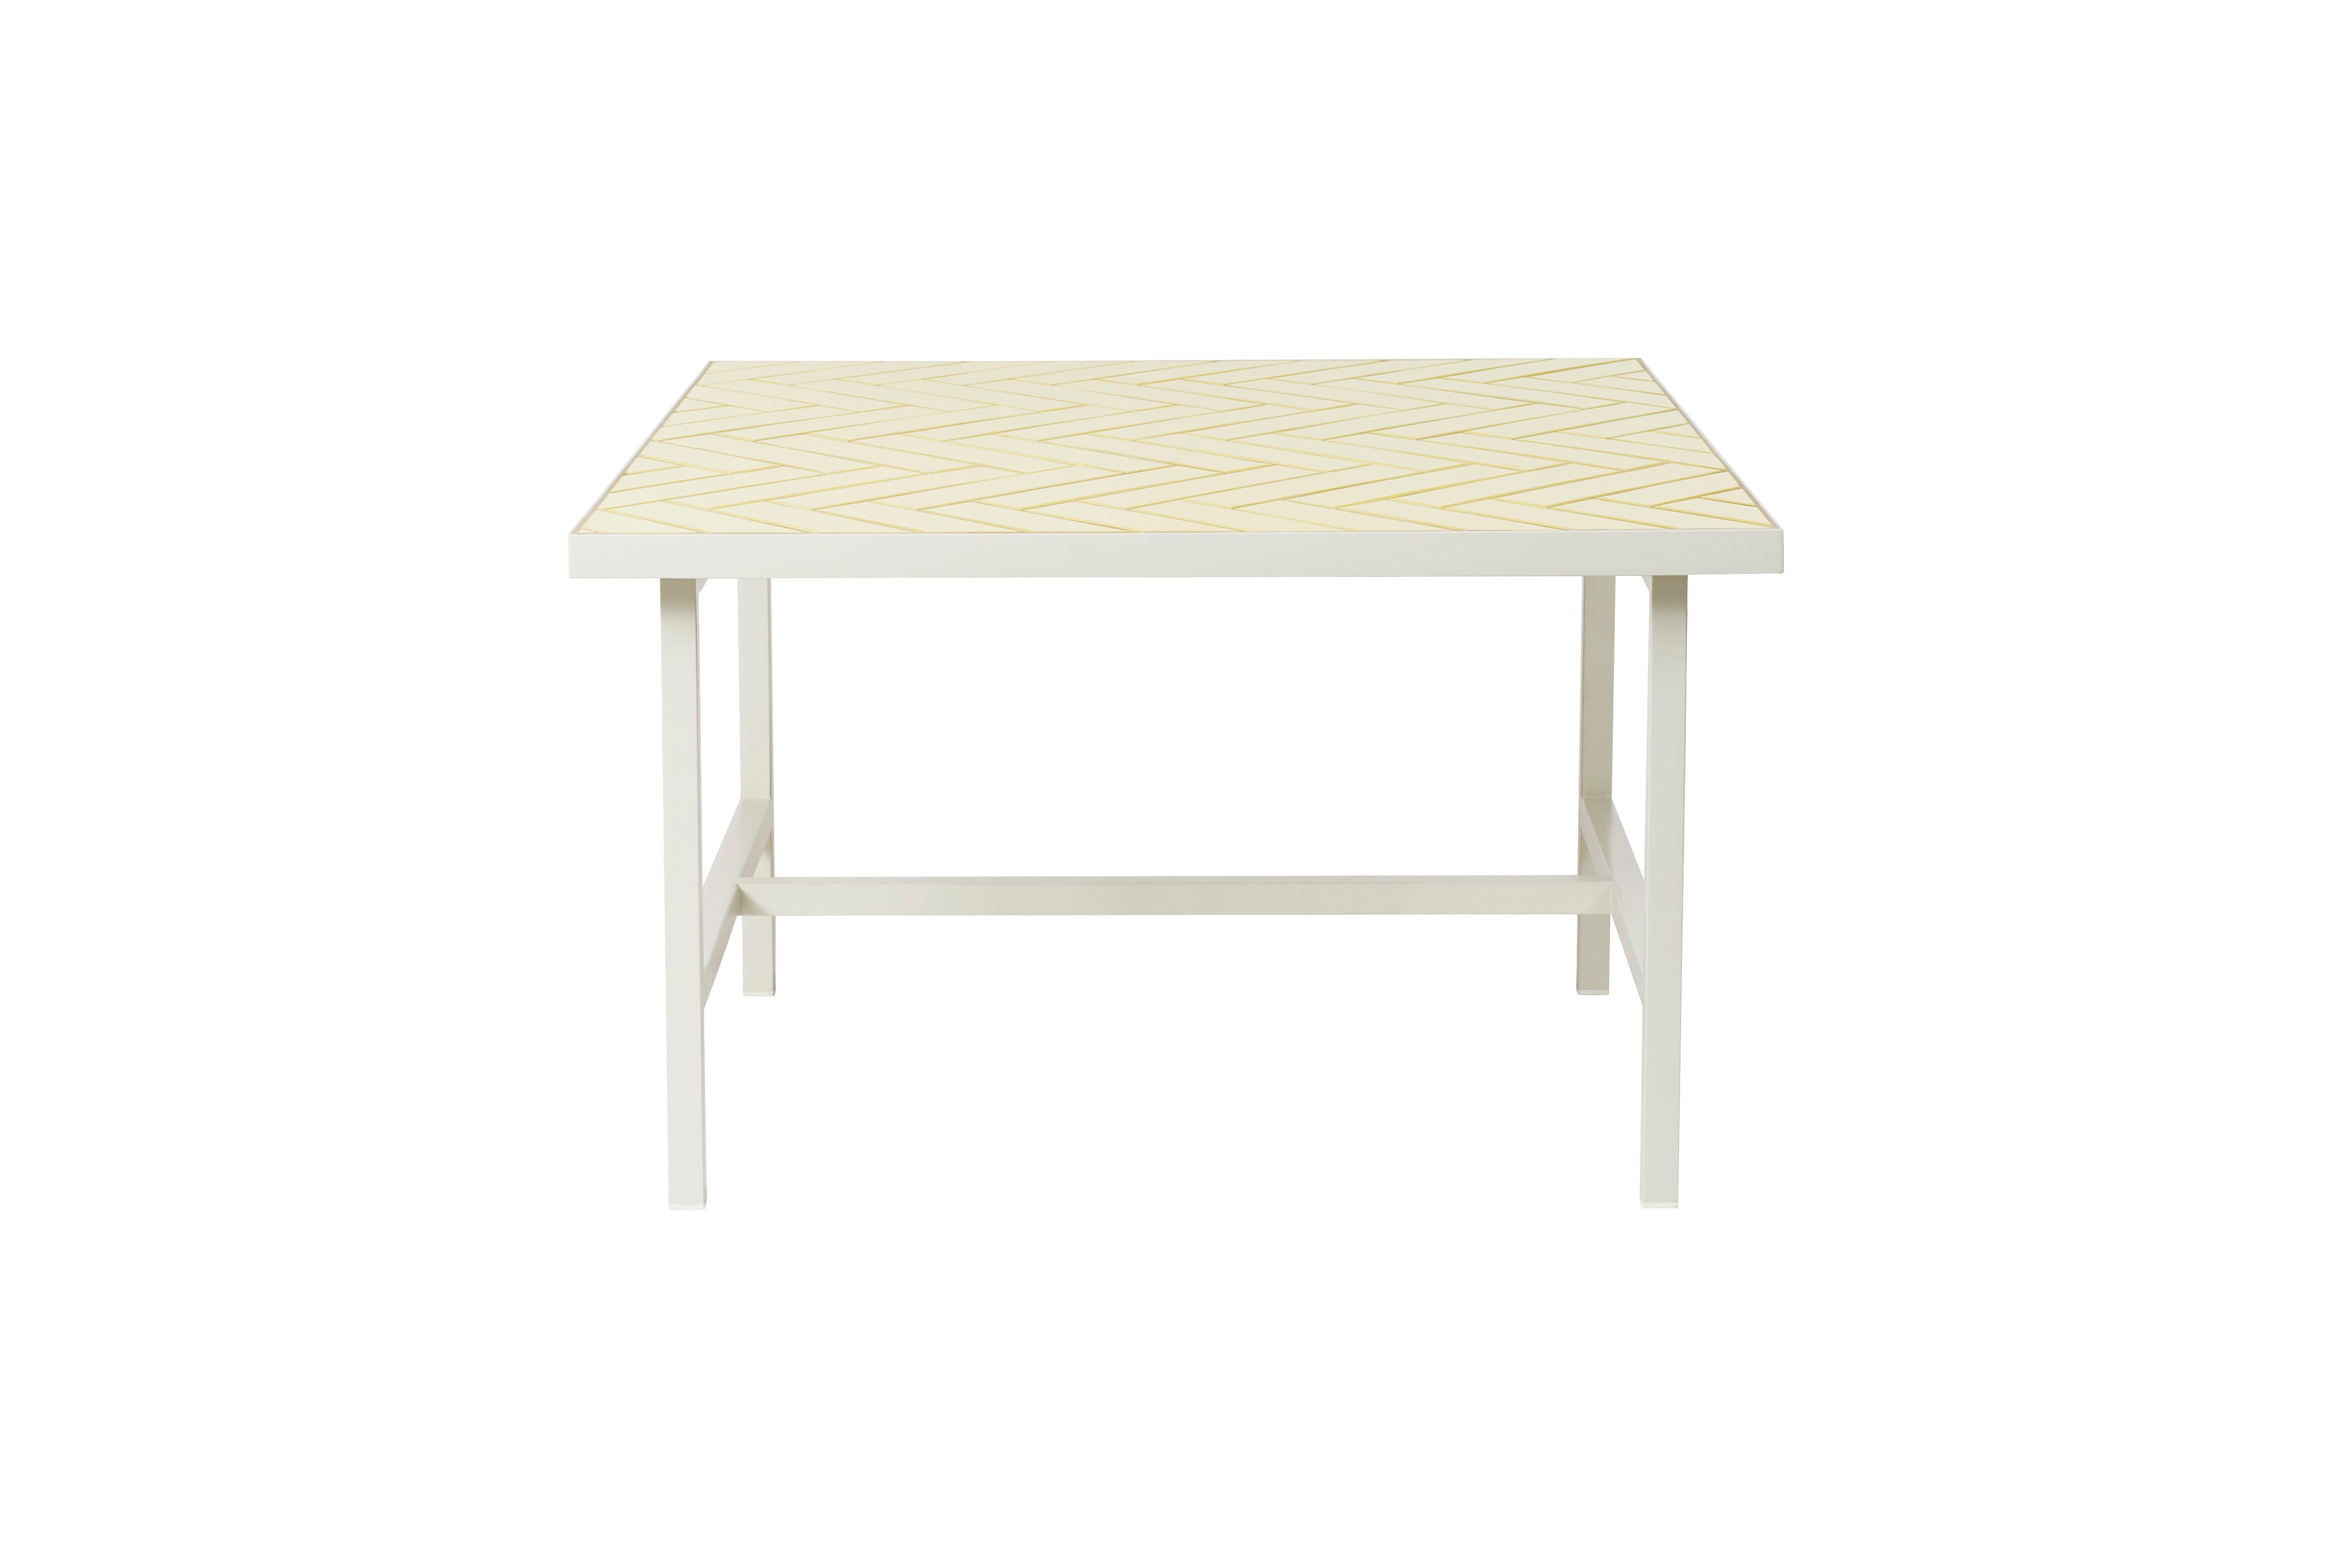 For Sale: Yellow (Butter yellow) Herringbone Coffee Table, by Charlotte Høncke from Warm Nordic